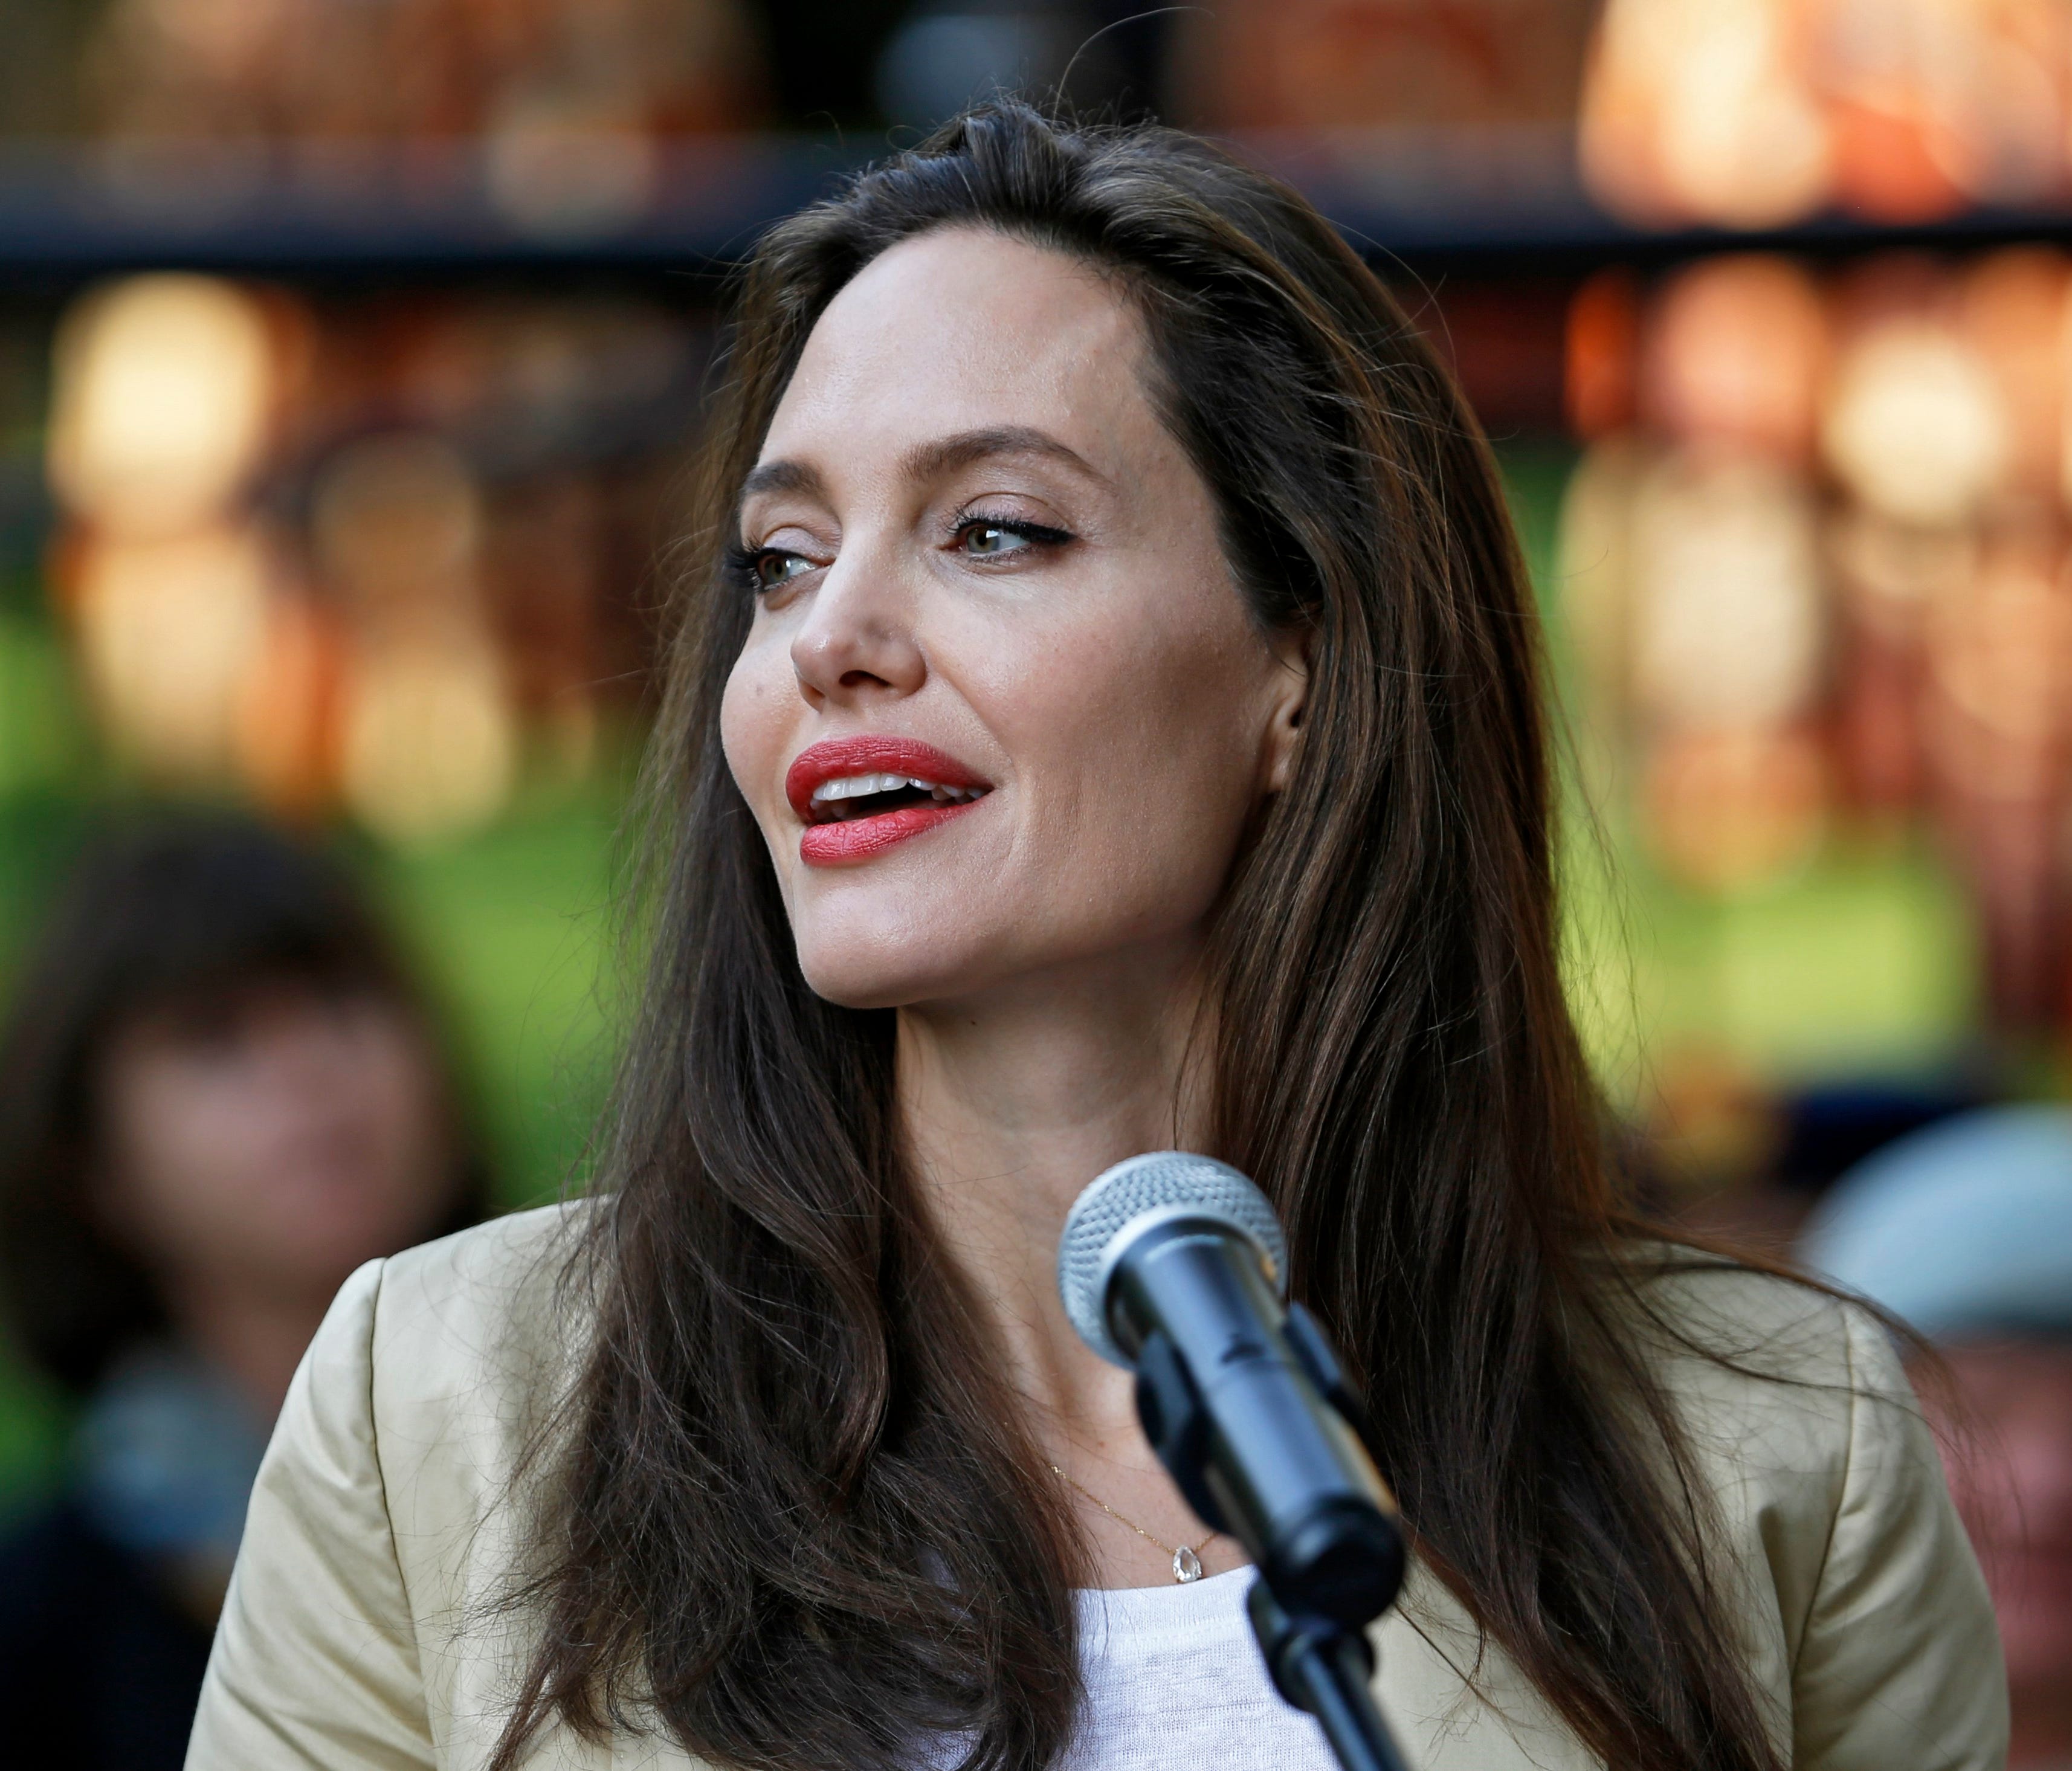 Angelina Jolie, seen here during a June visit to Kenya, announced she has developed Bell's Palsy, a type of facial paralysis.